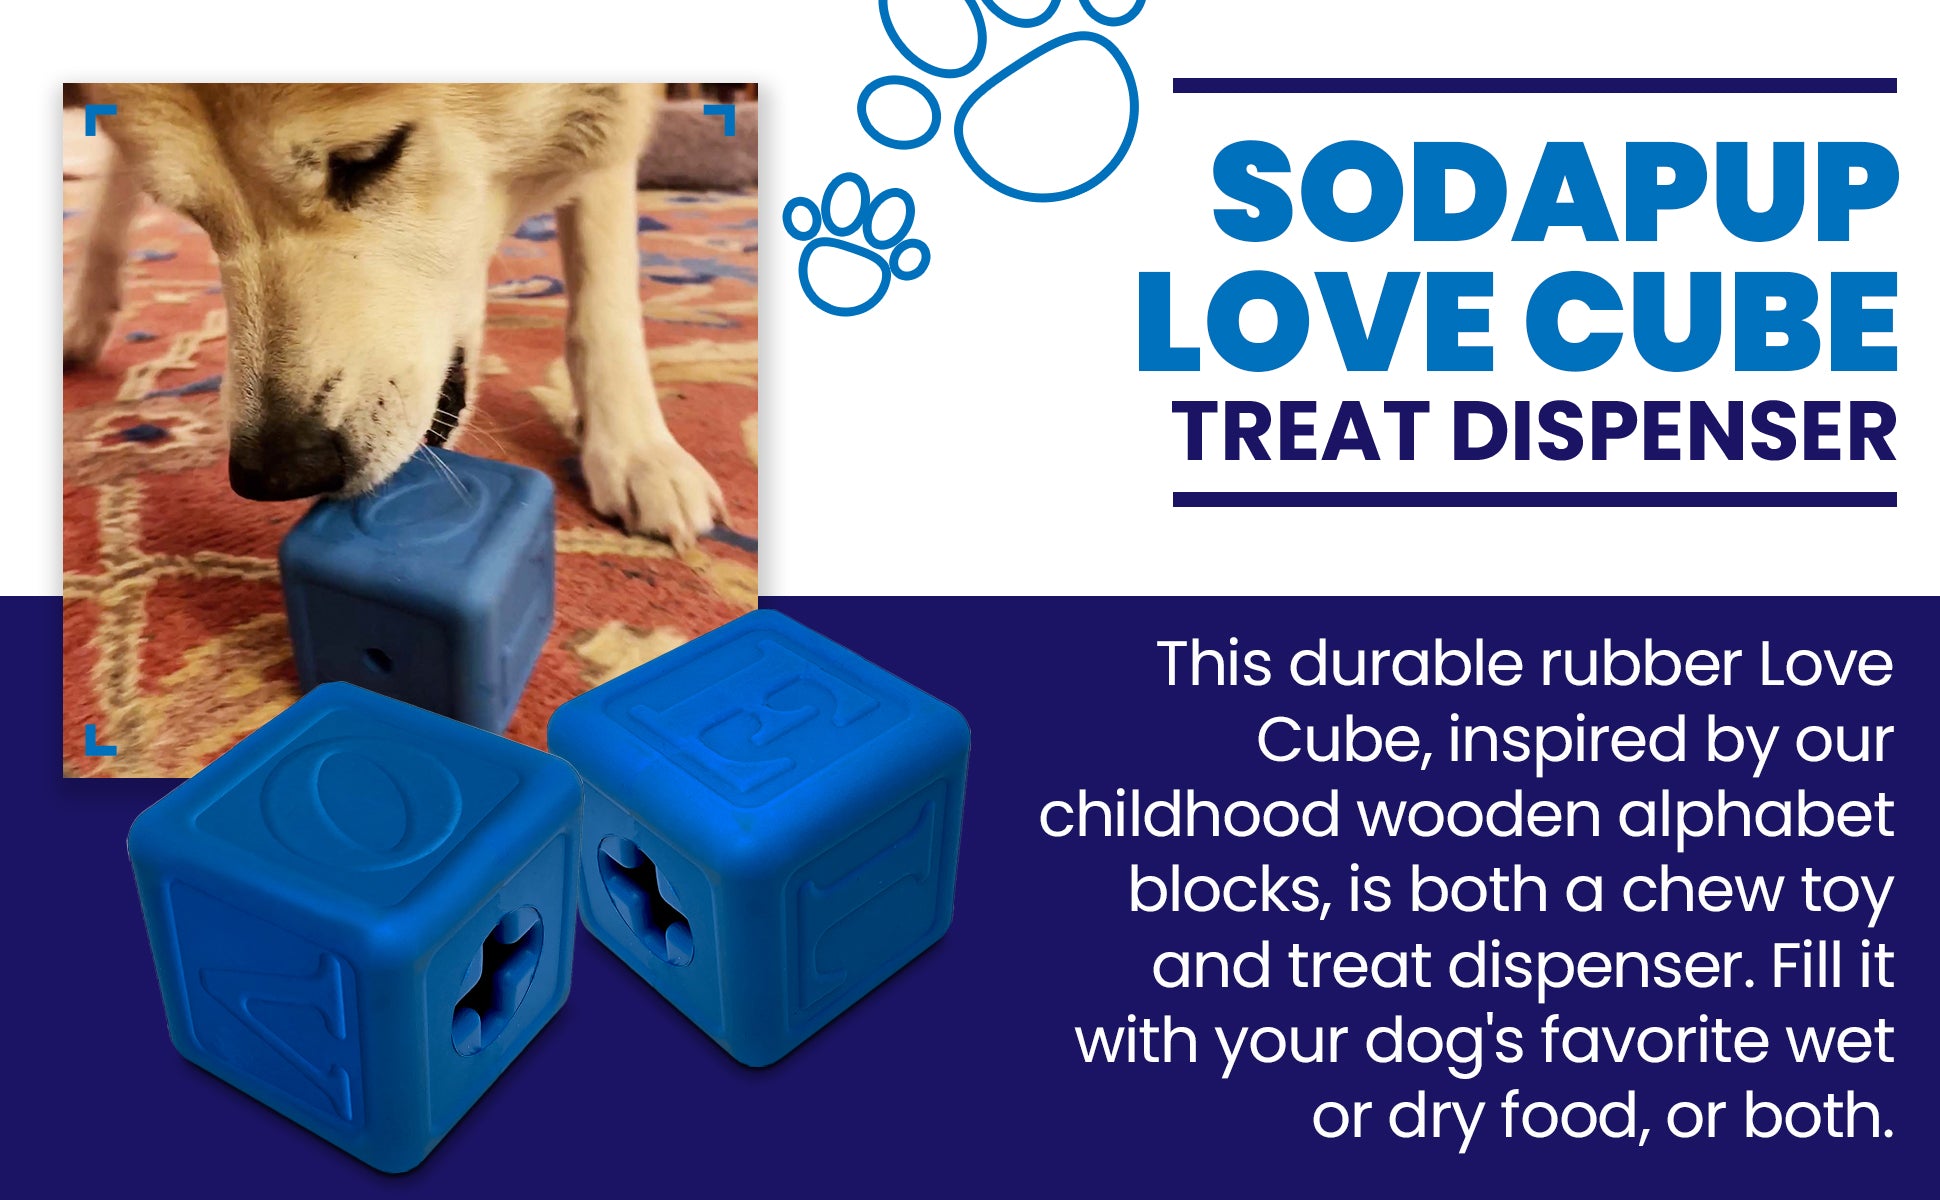 SodaPup - Love Cube Durable Rubber Chew Toy & Treat Dispenser